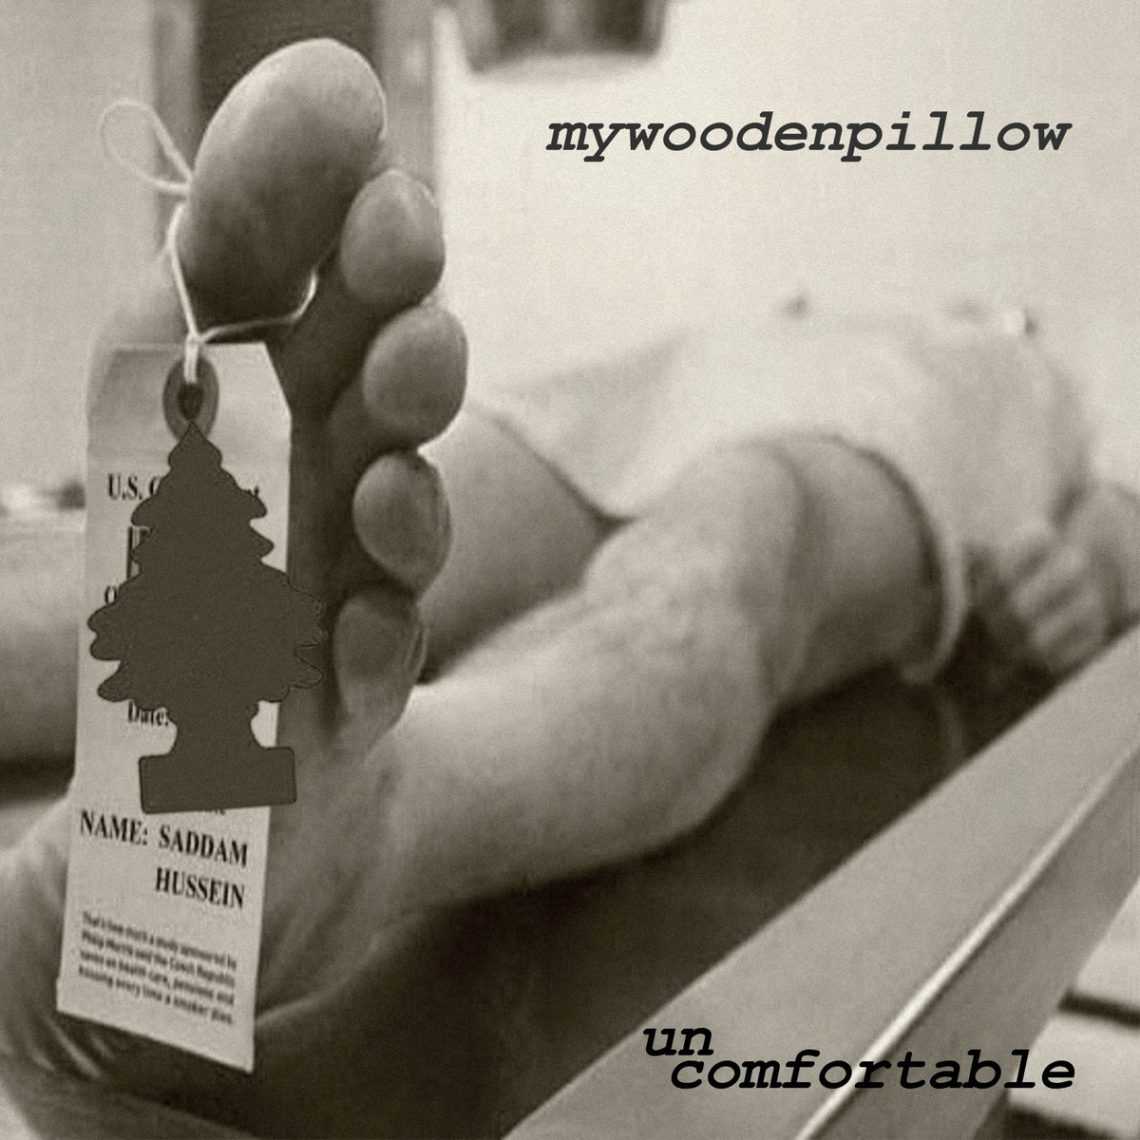 My Wooden Pillow – Uncomfortable EP